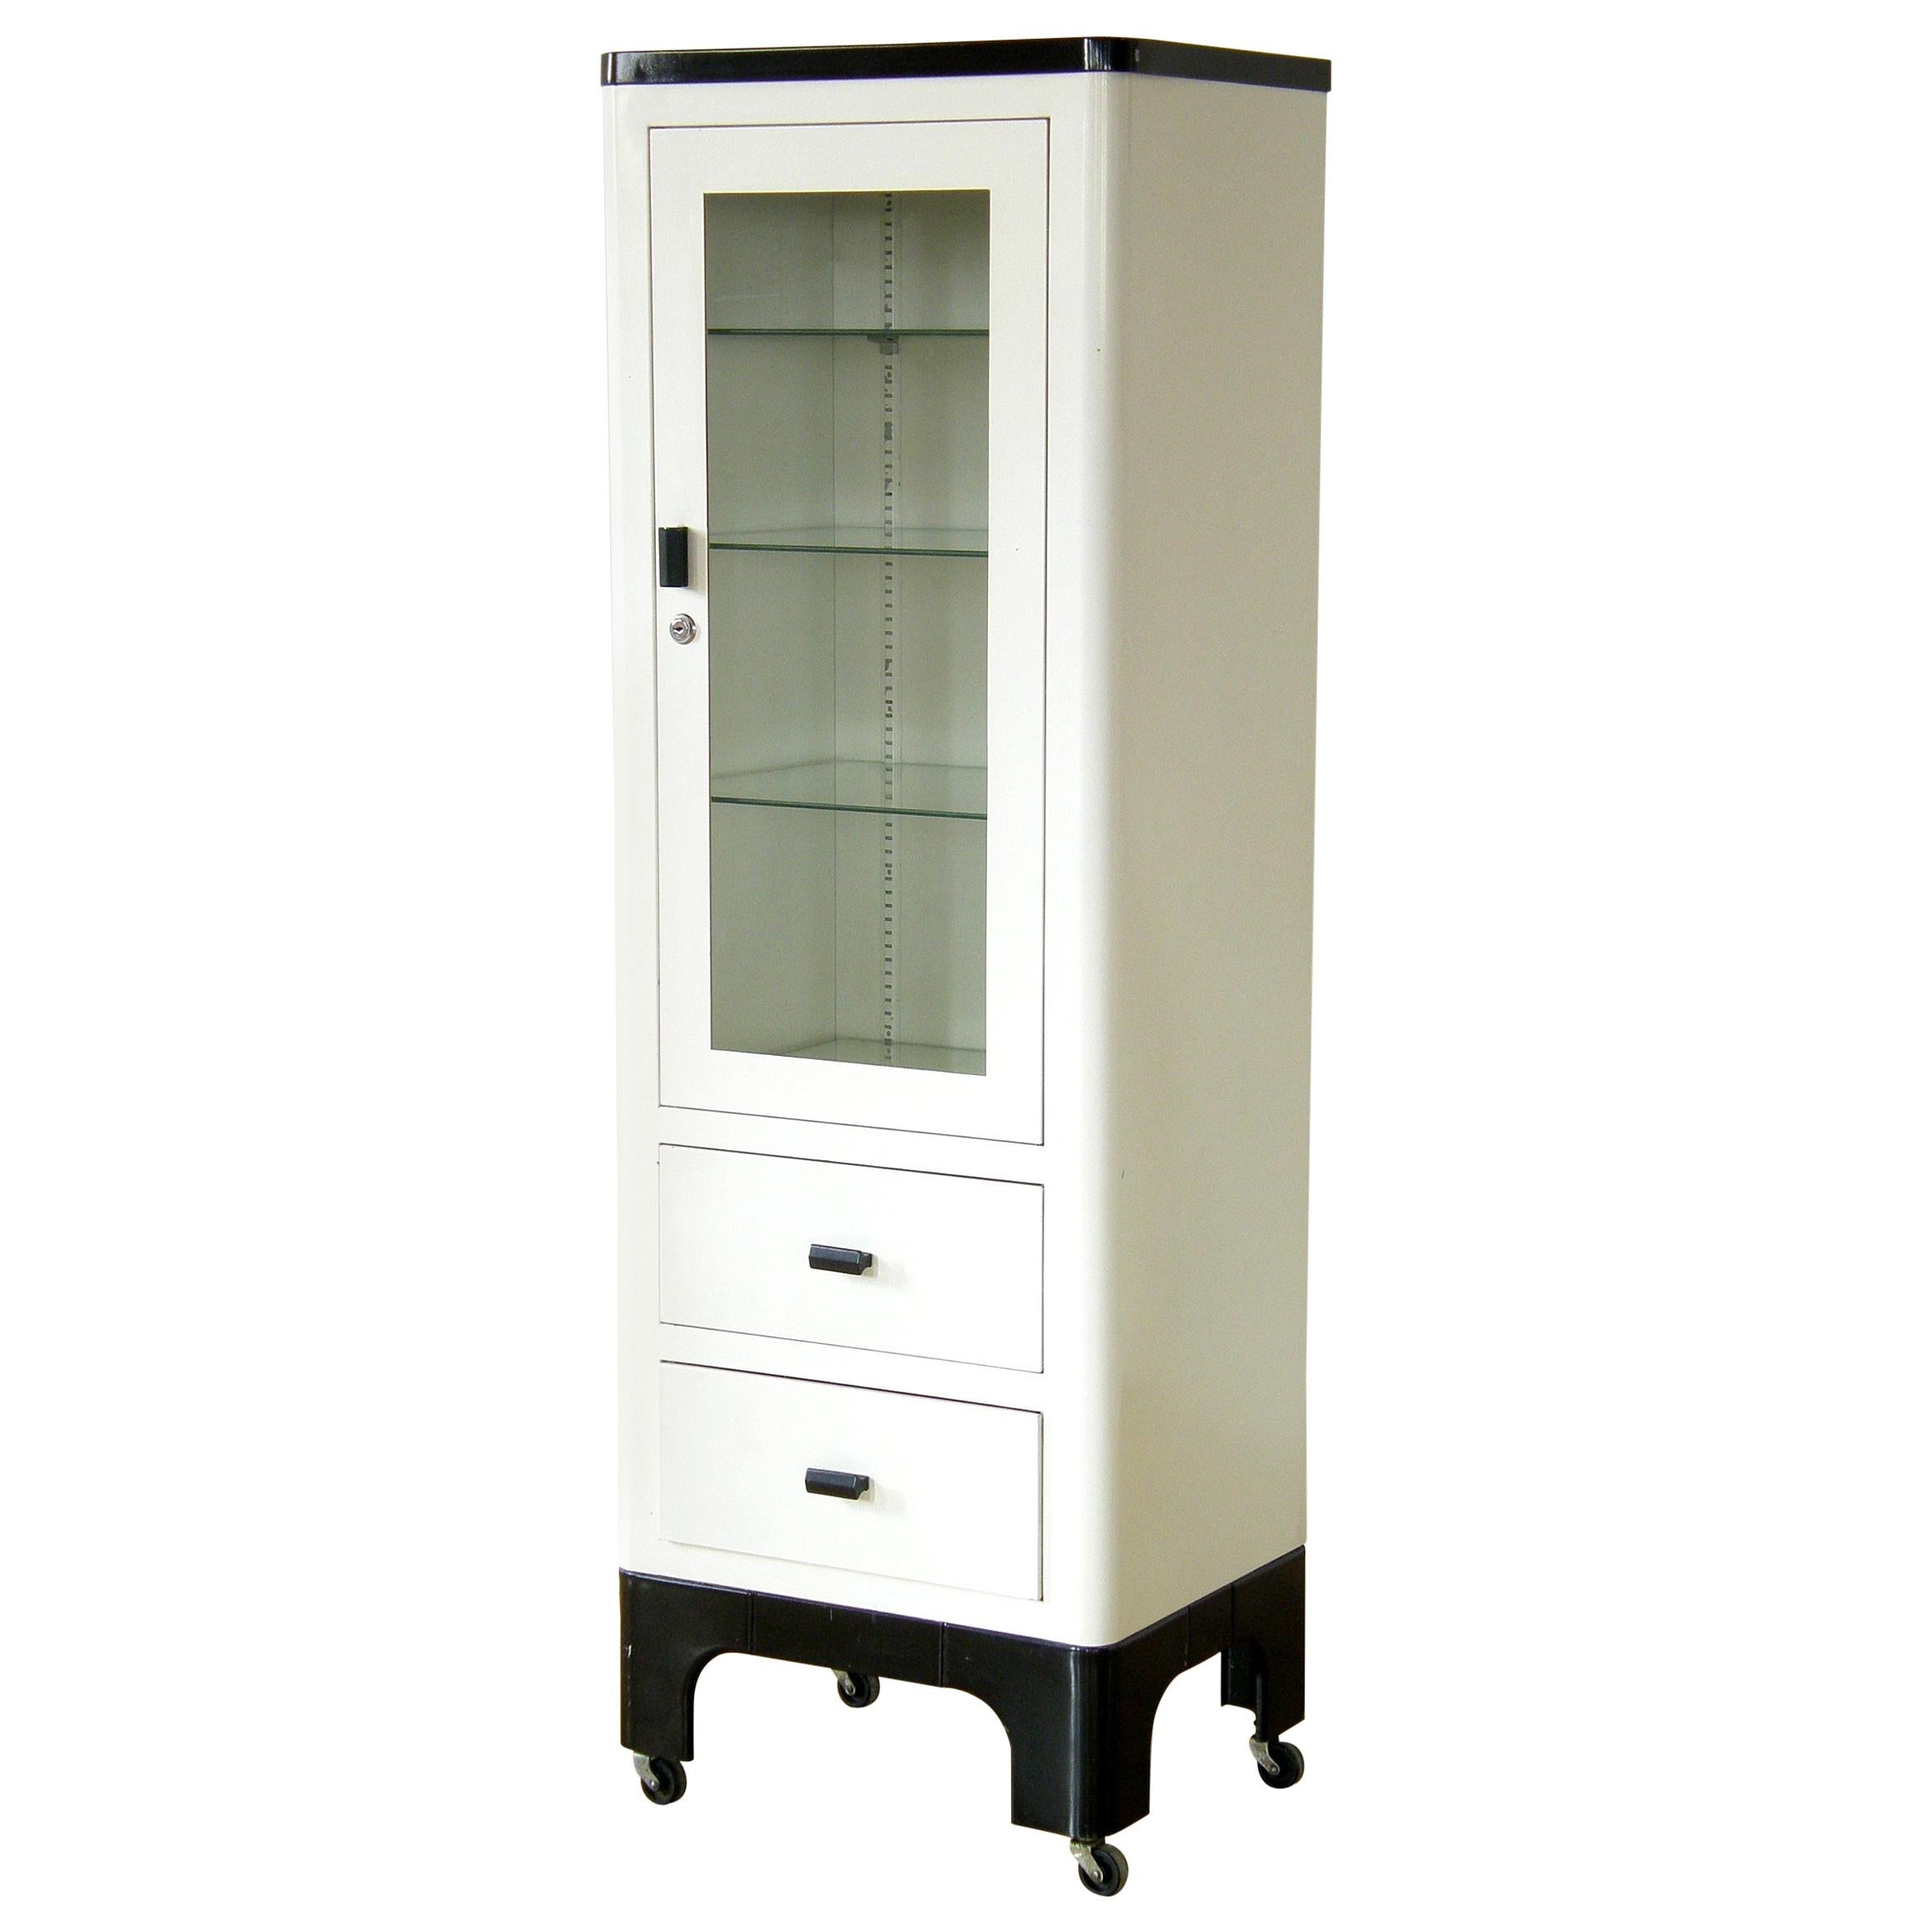 Tall 1930s Medical Storage Cabinet White and Black Enameled Steel Glass Door